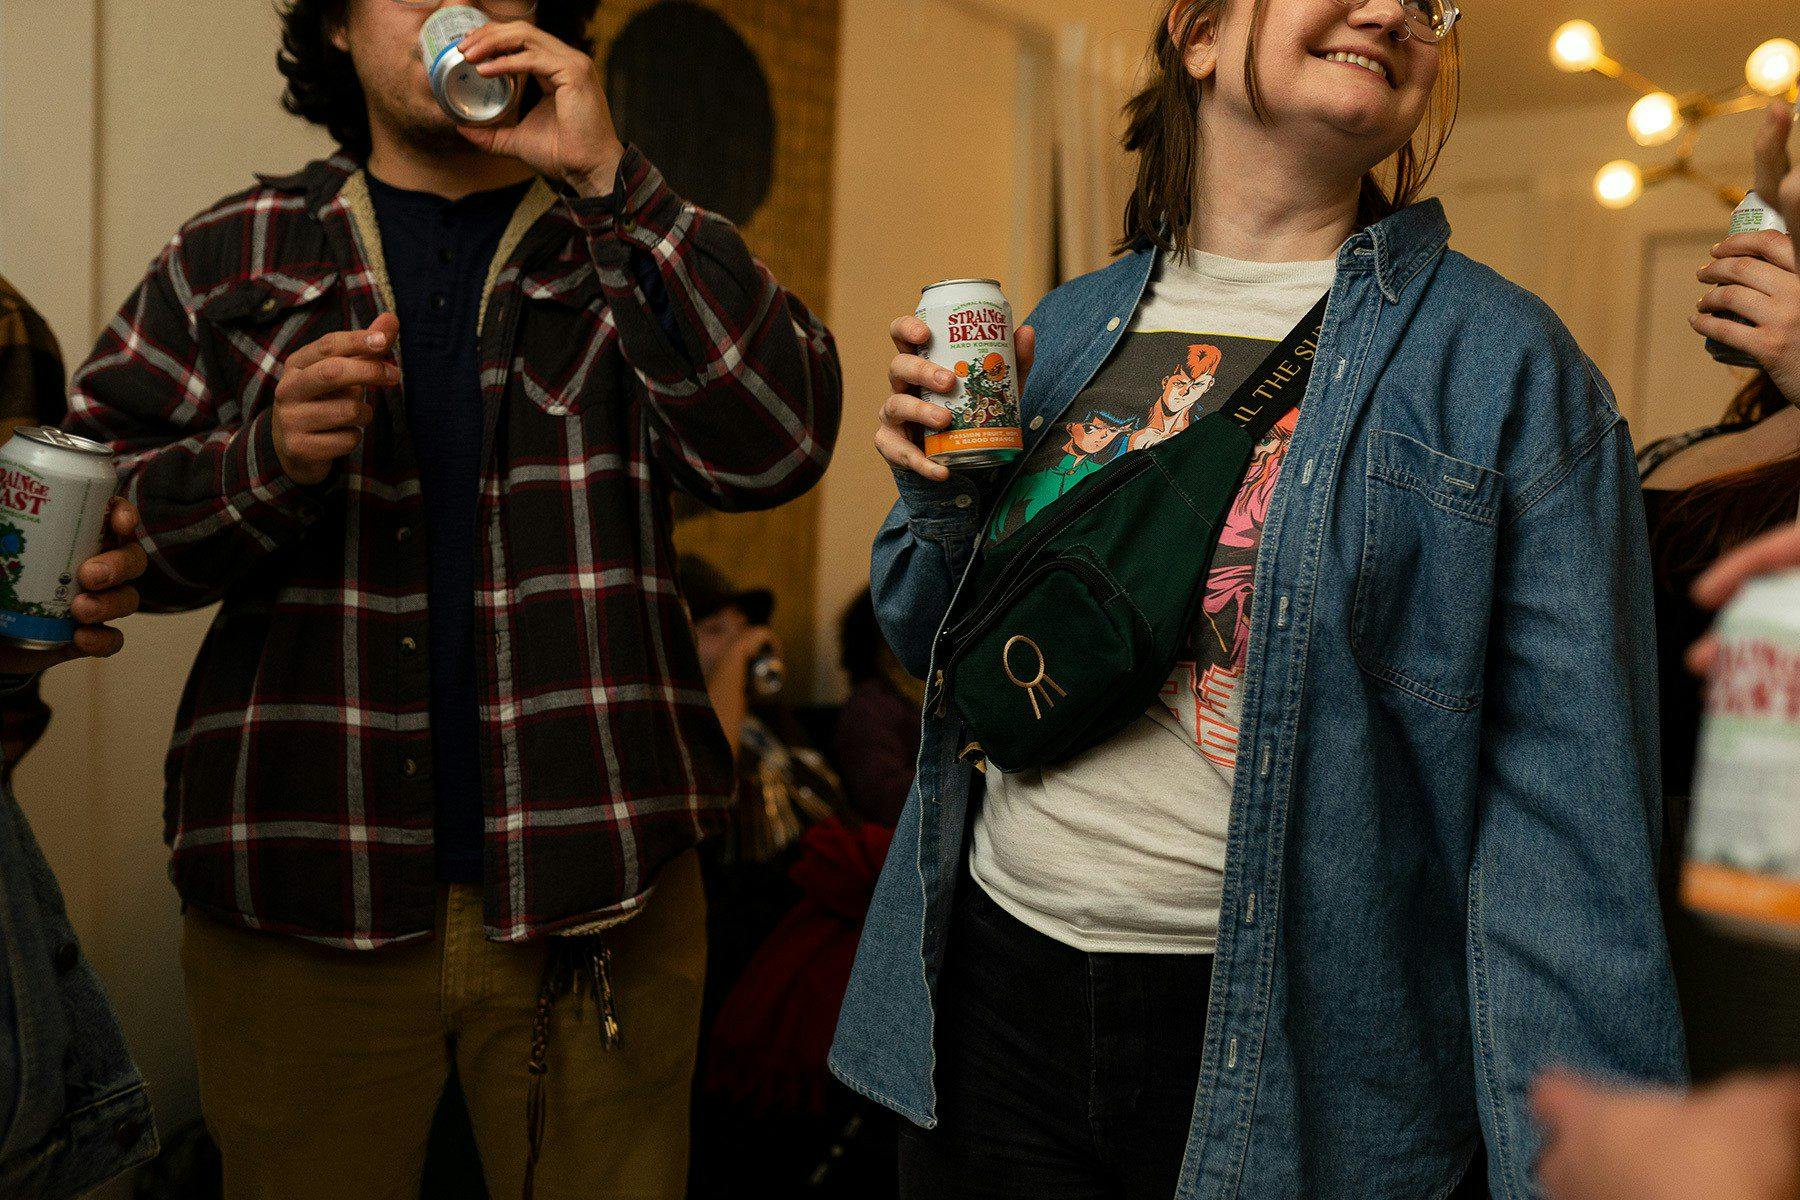 Two friends holding cans of Strainge Beast at a house party